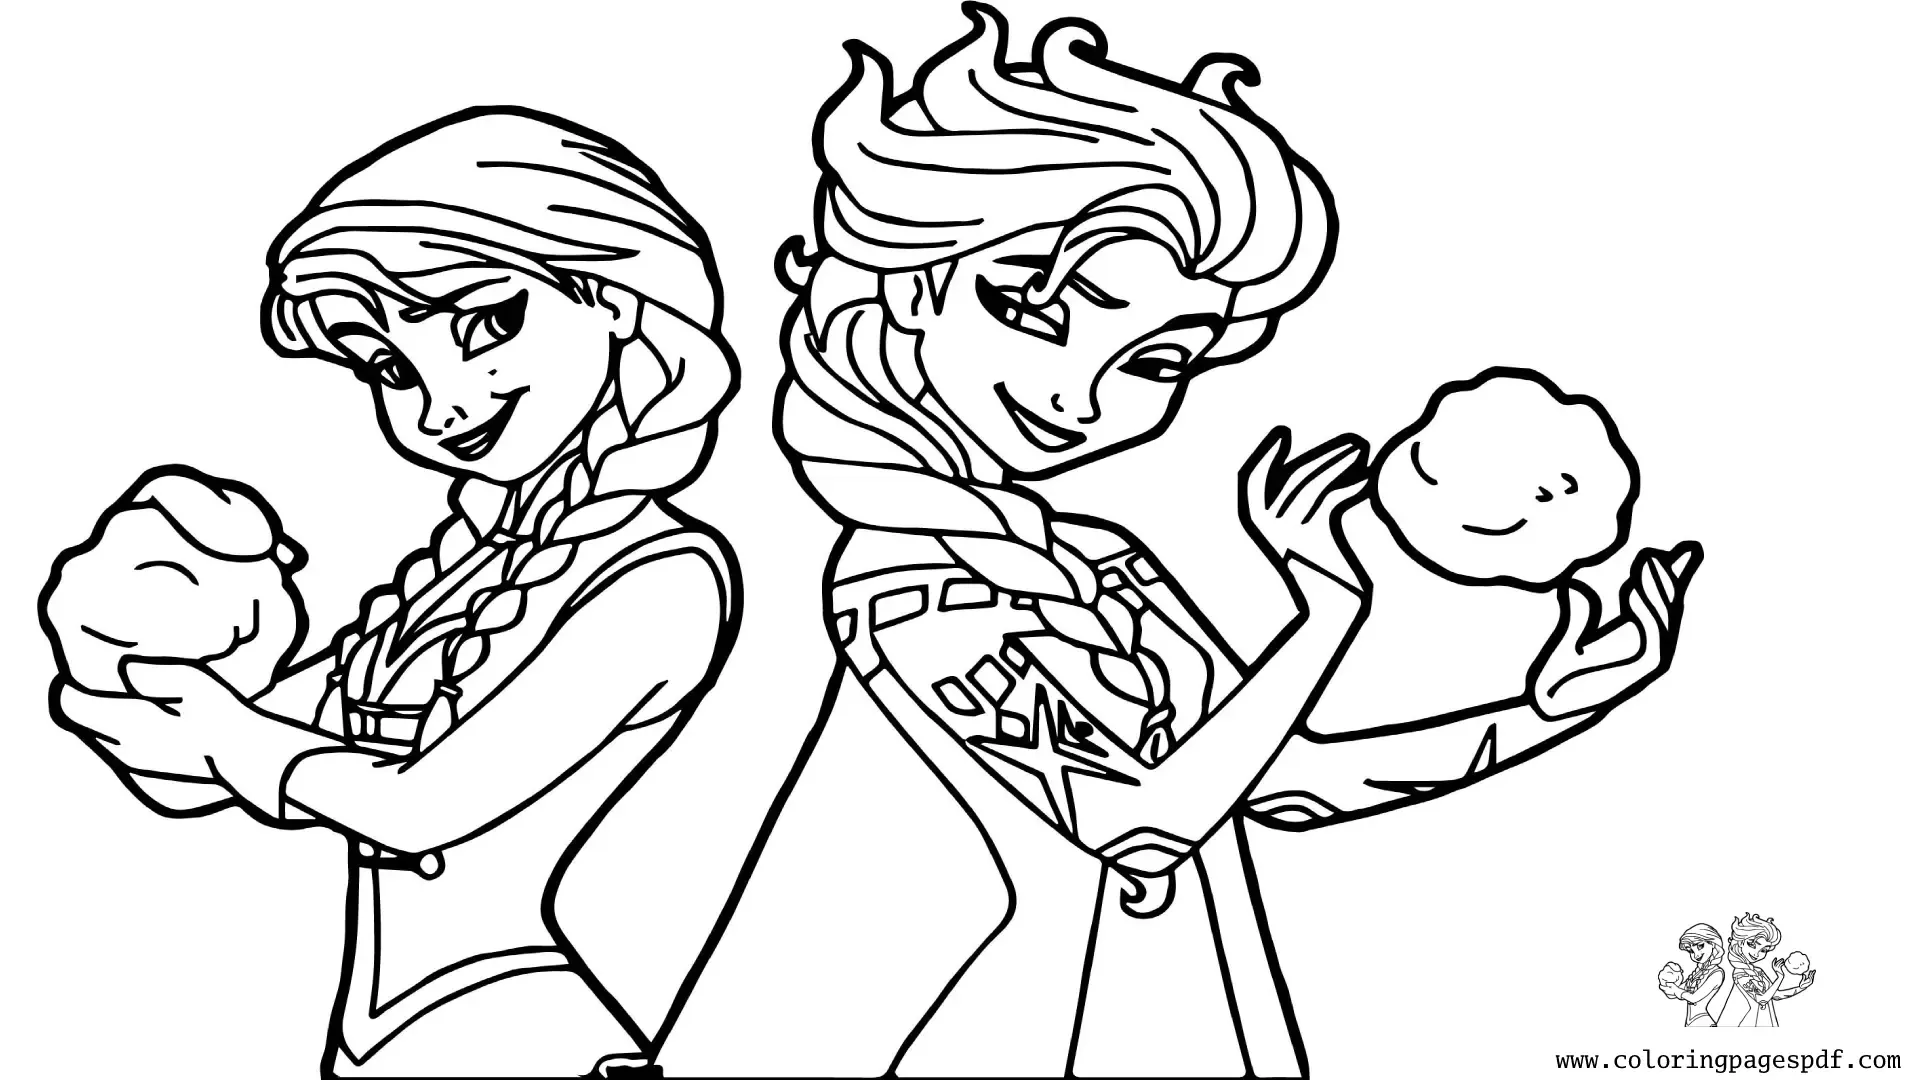 Coloring Page Of Elsa And Anna Holding Snowballs